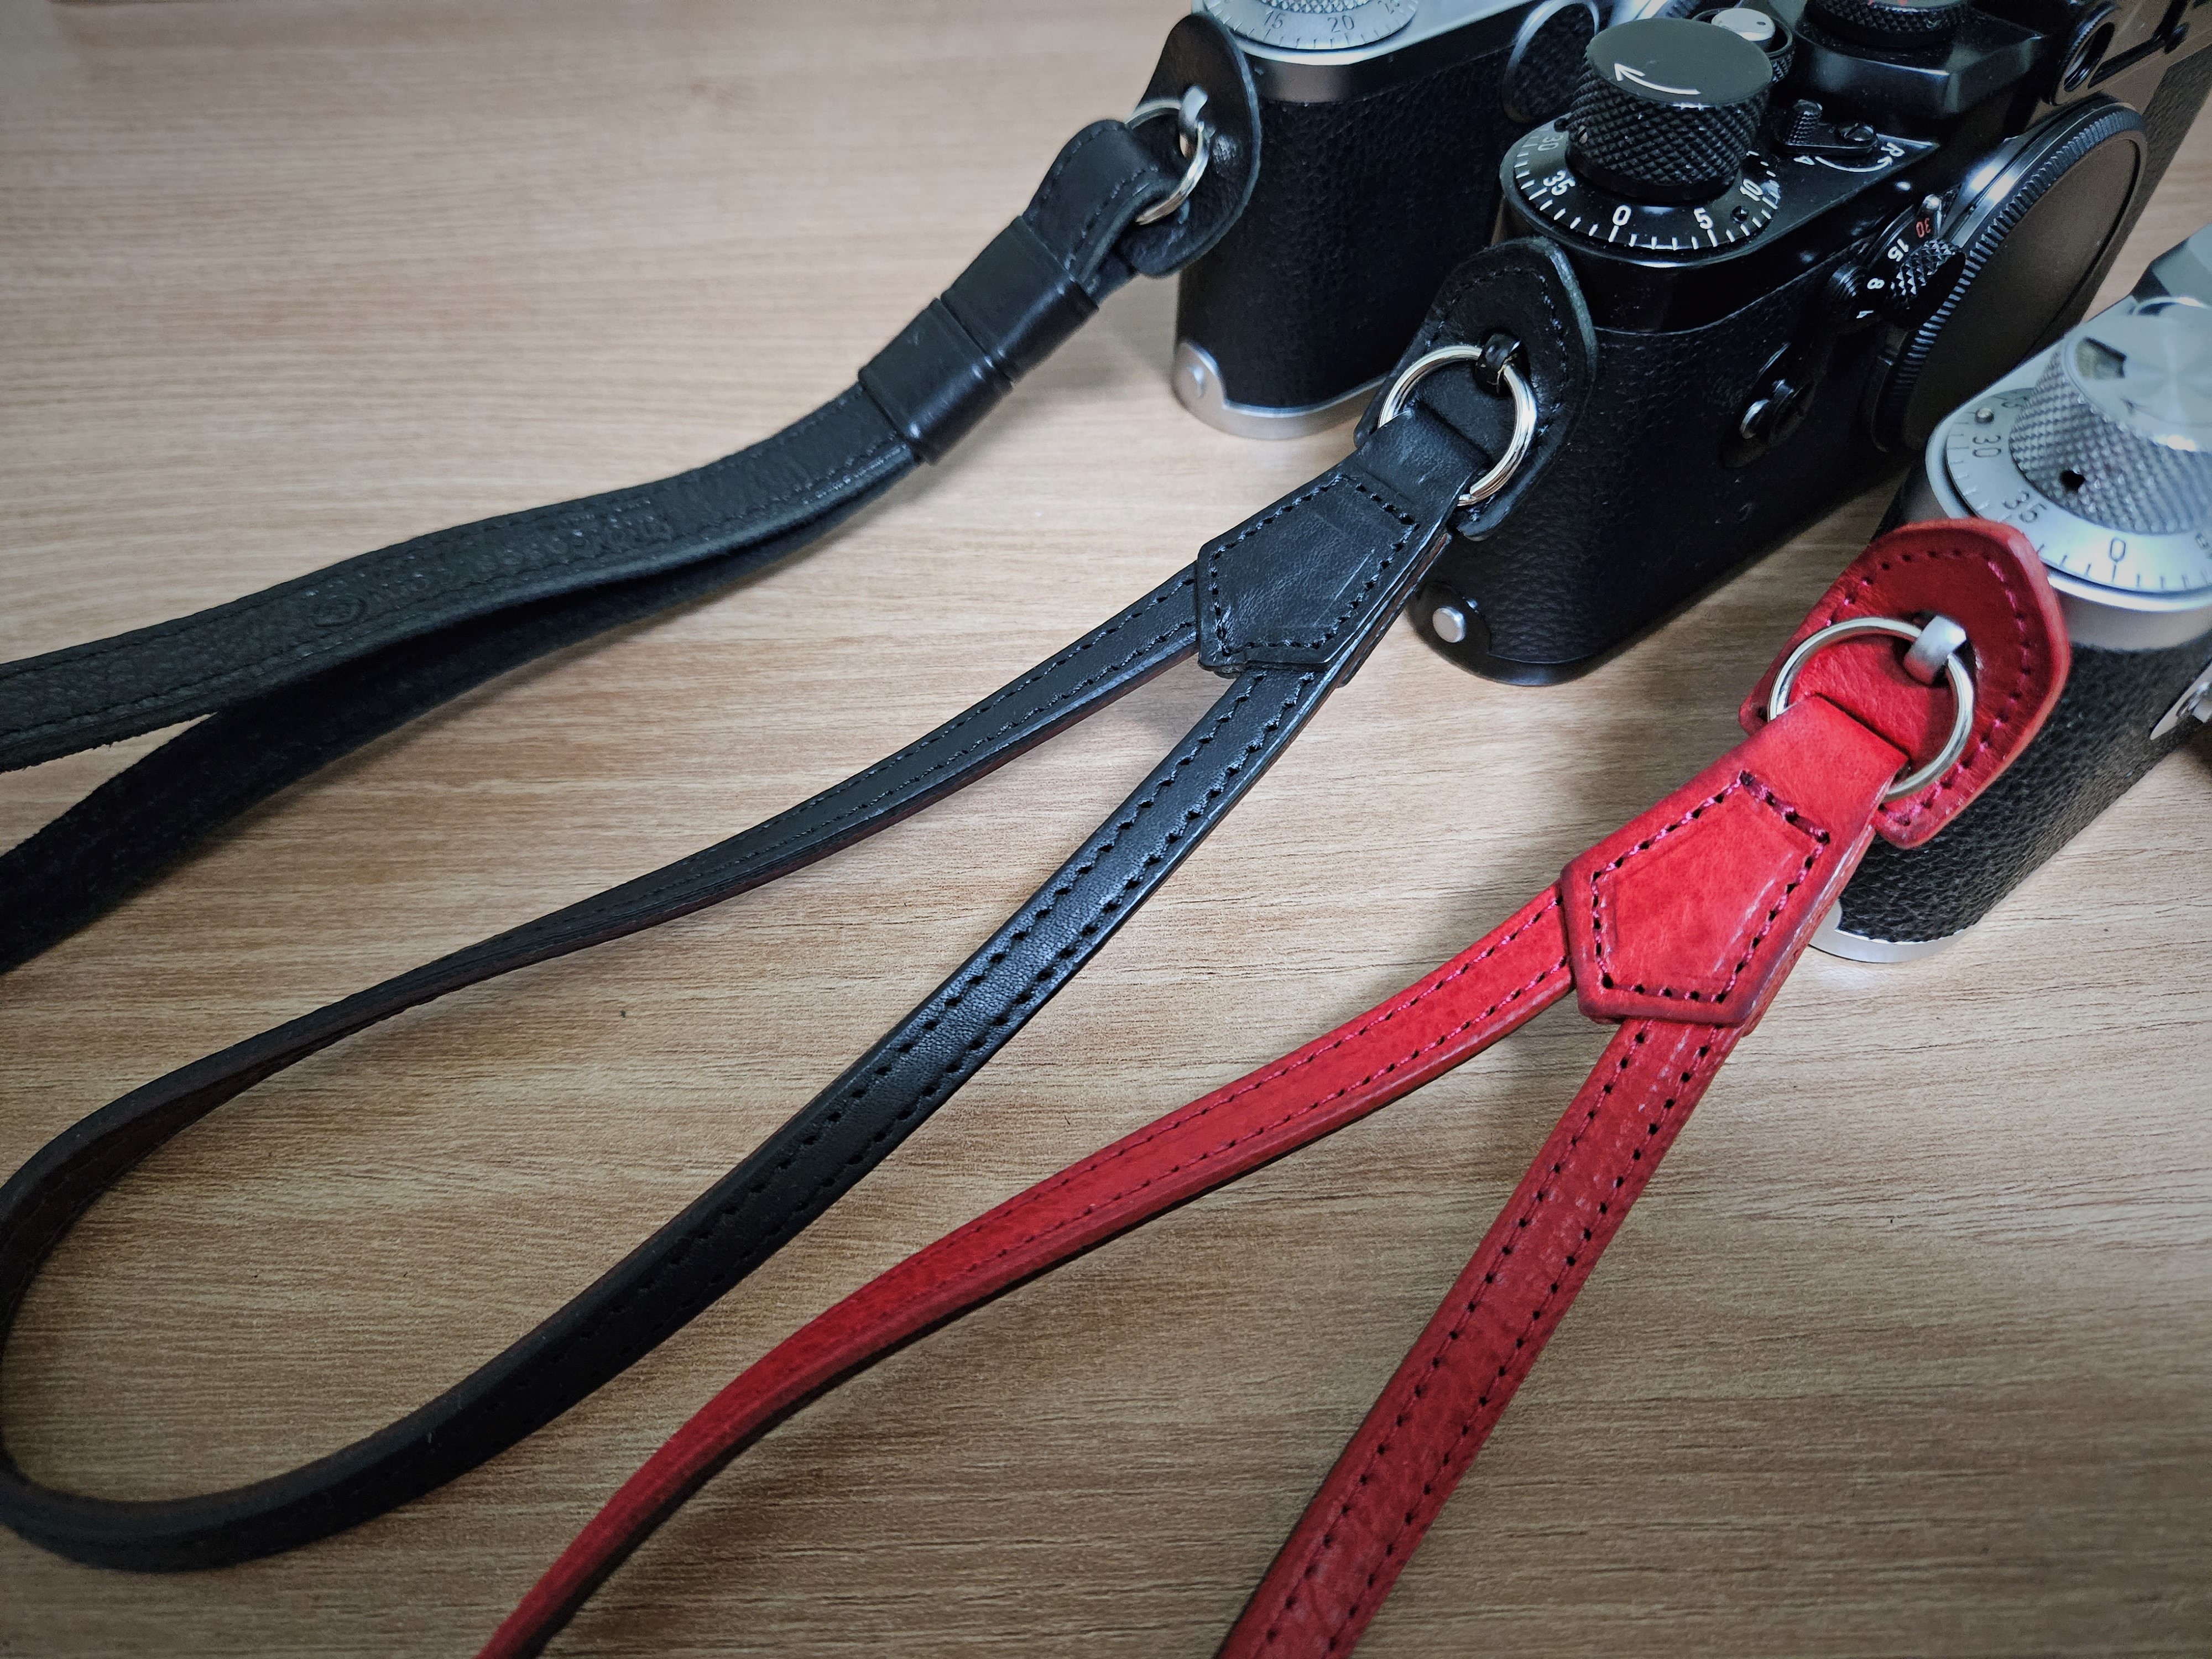 The search for the perfect hand straps